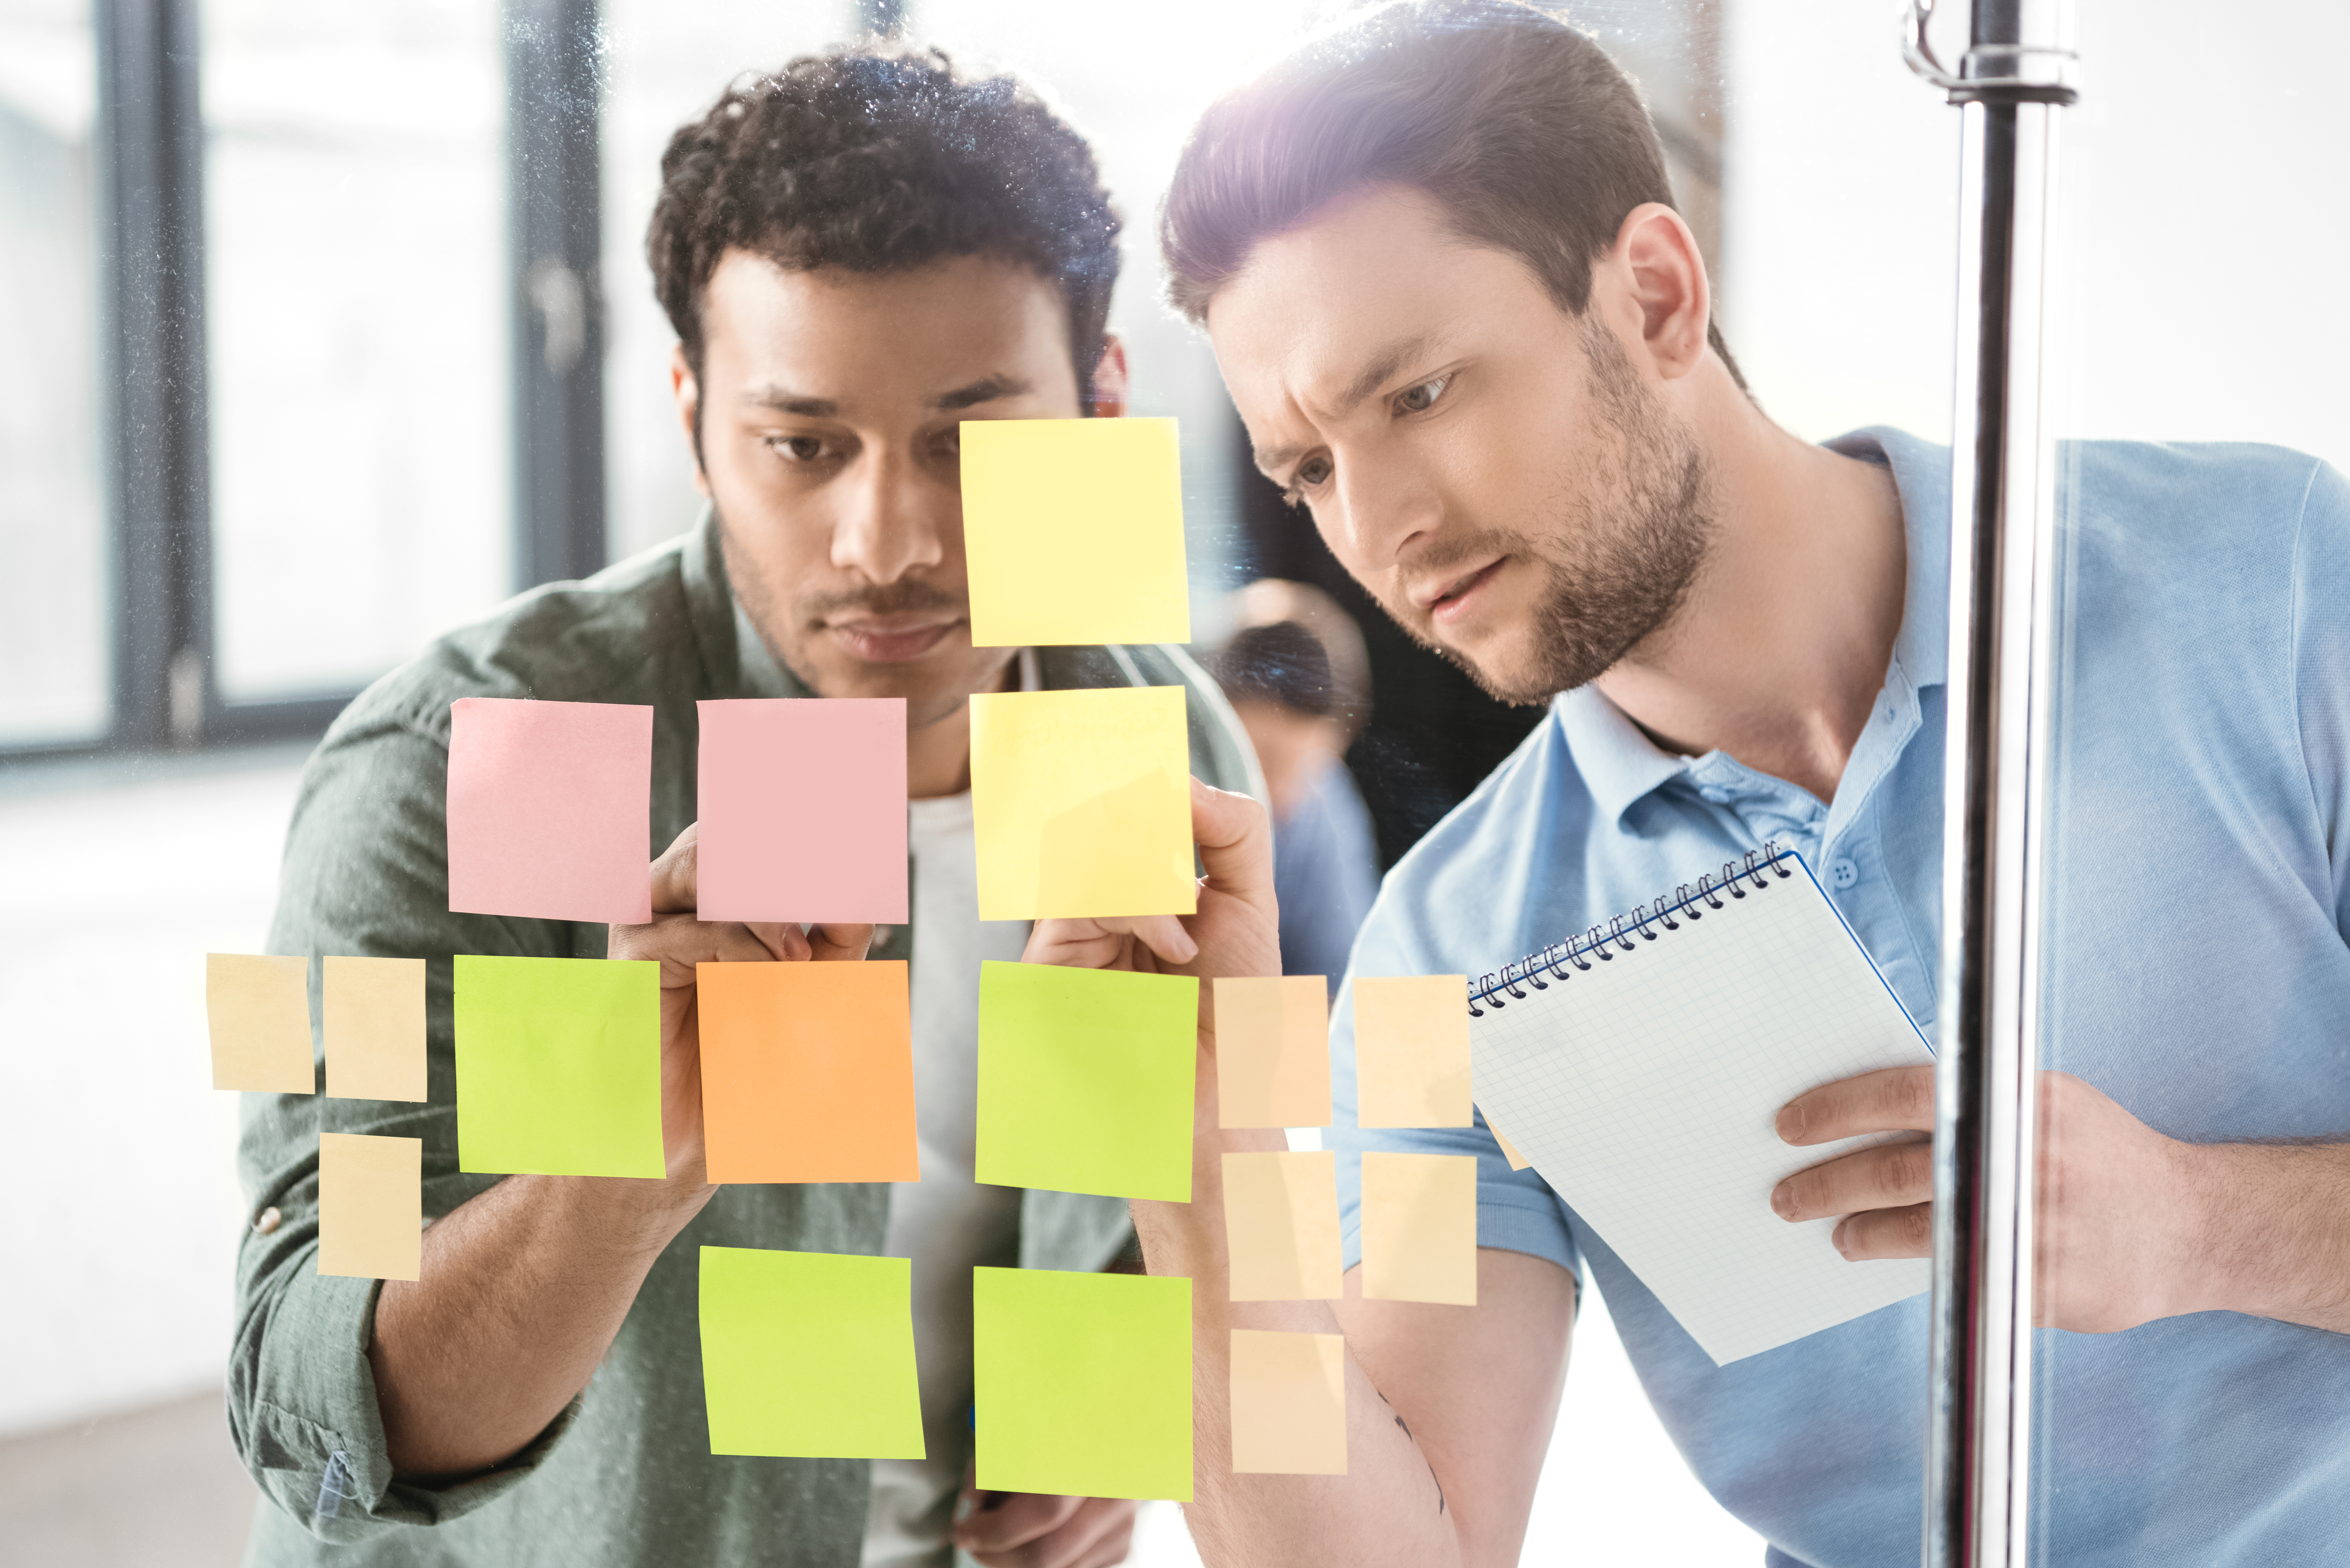 Depositphotos_152079742_xl-2015 (2 men working with post its)